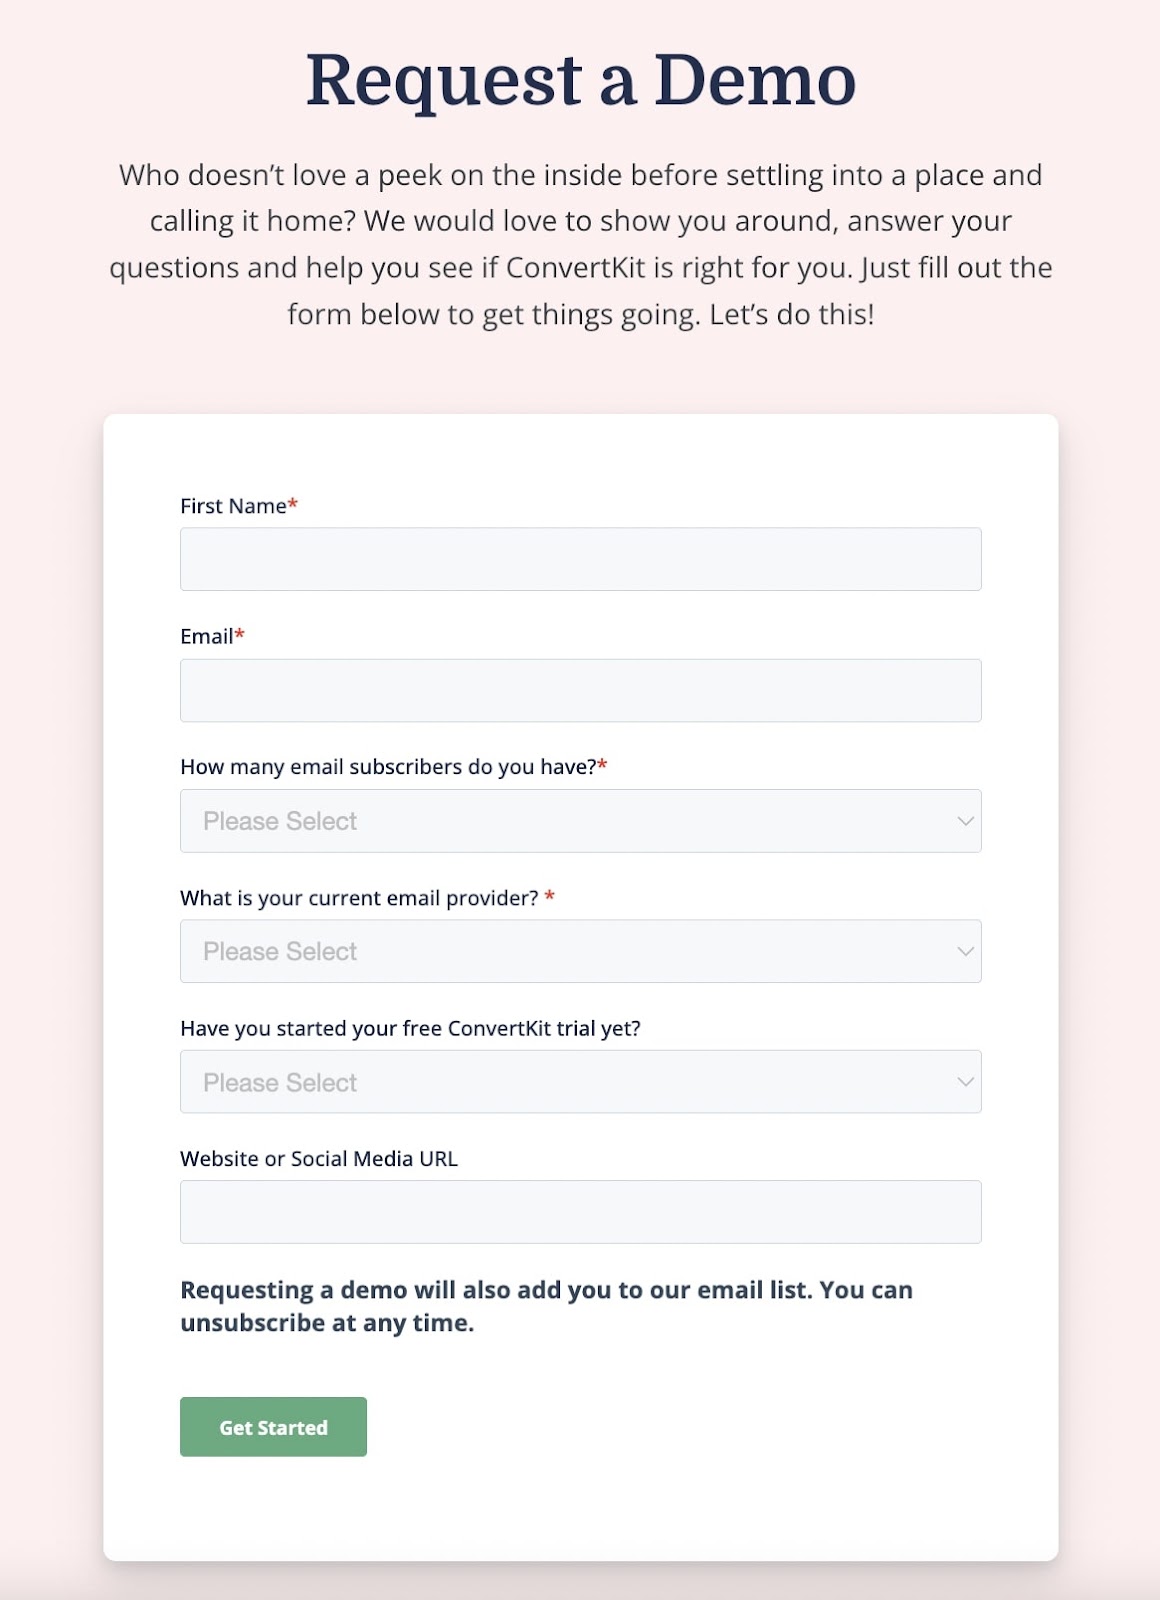 "Request a Demo" form from ConvertKit